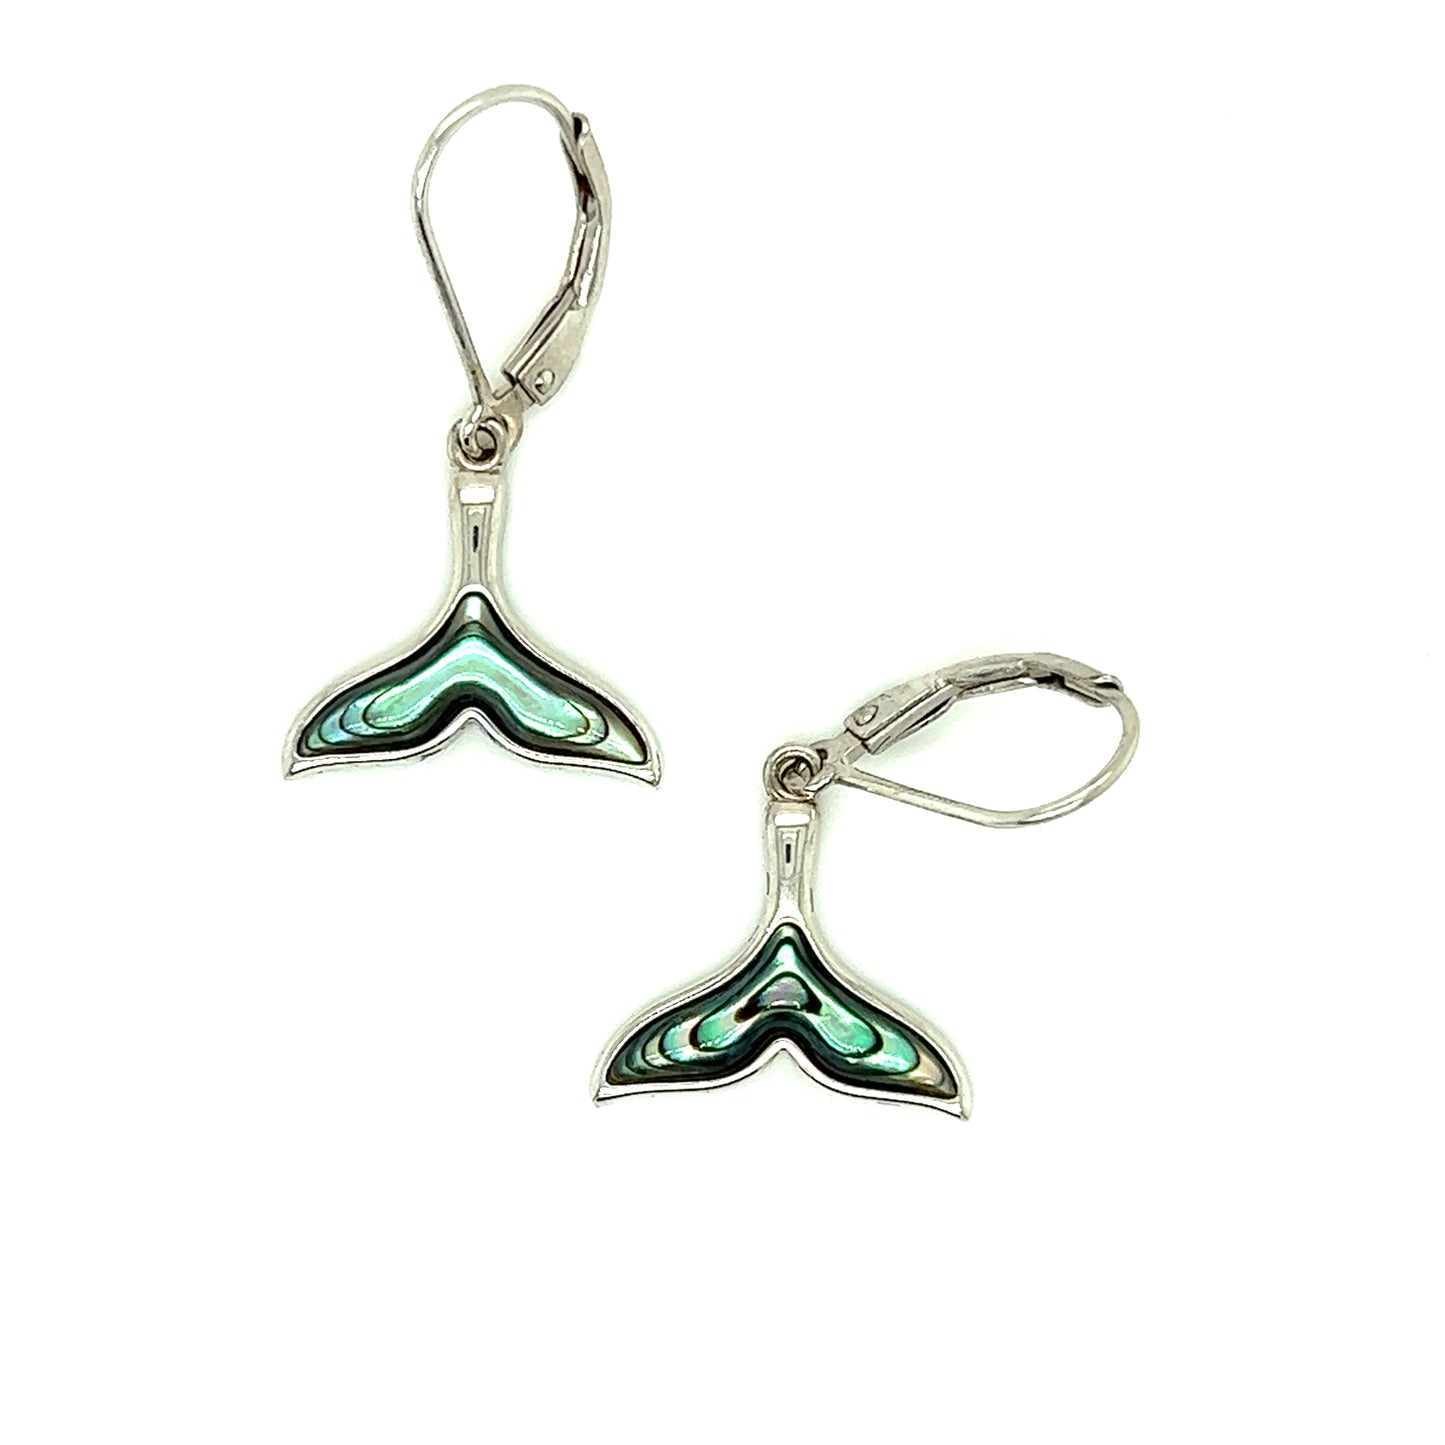 Whale Tail Dangle Earrings with Abalone Shell Details in Sterling Silver Alternative View